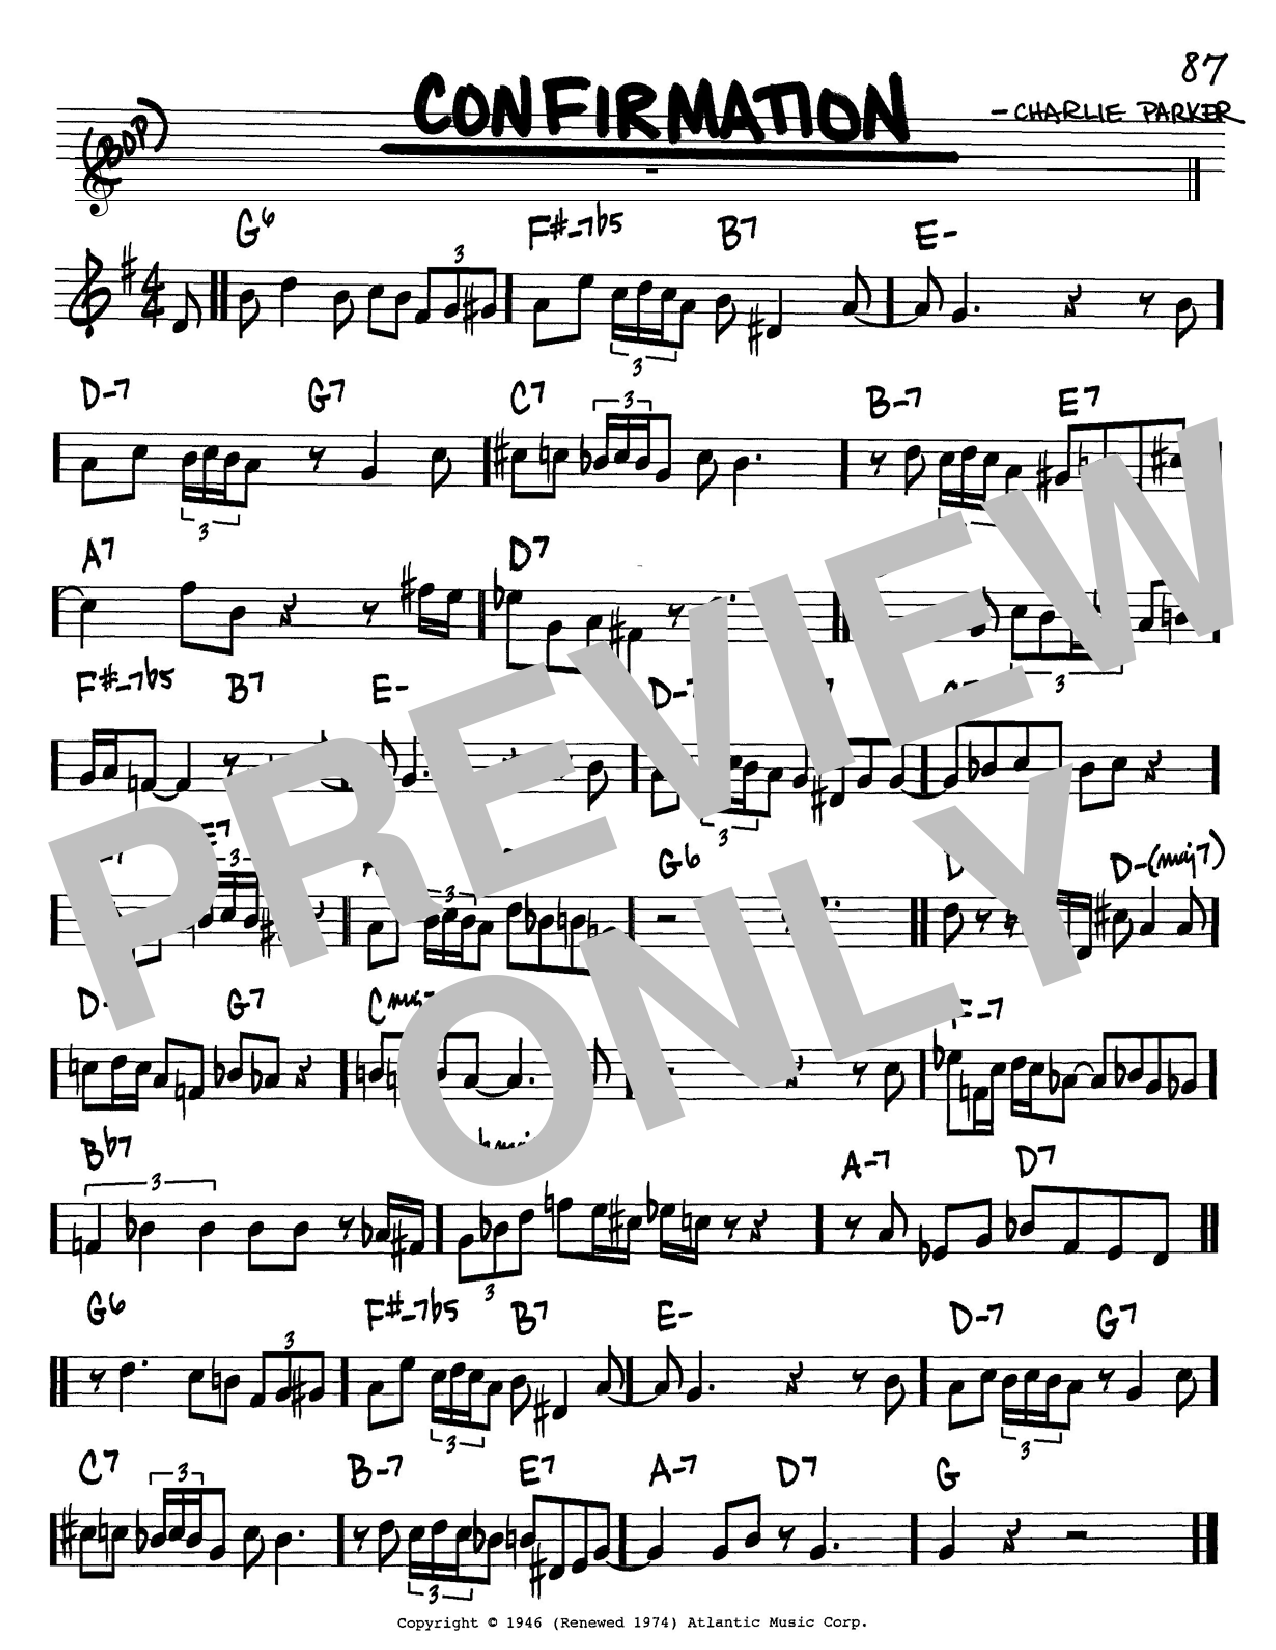 Charlie Parker Confirmation sheet music notes and chords. Download Printable PDF.